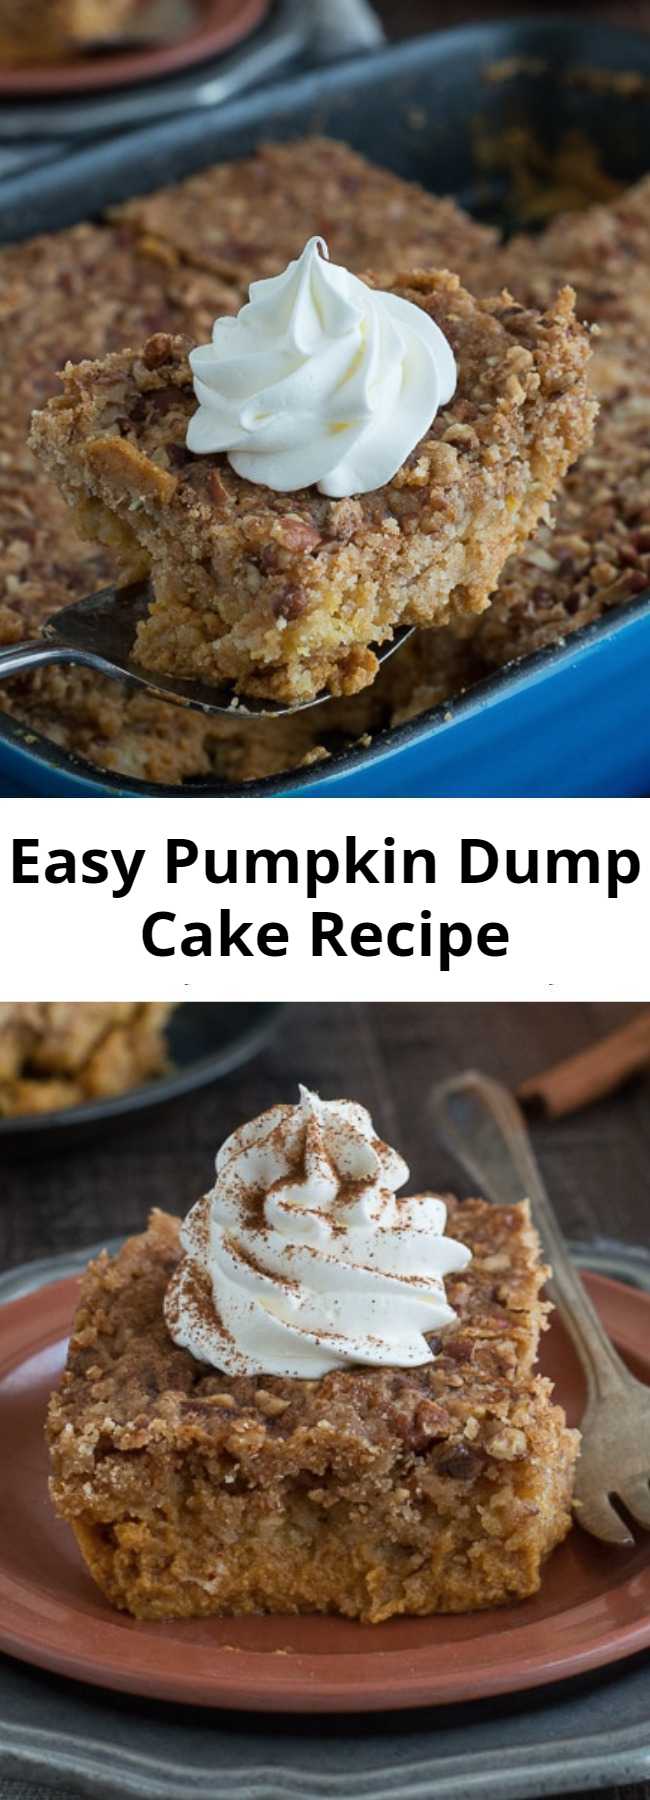 Easy Pumpkin Dump Cake Recipe - Use canned pumpkin and a box of yellow cake mix to make 8 ingredient pumpkin dump cake! Just mix, dump, and bake - it’s ready in under 1 hour! This will be a family favorite pumpkin dessert!